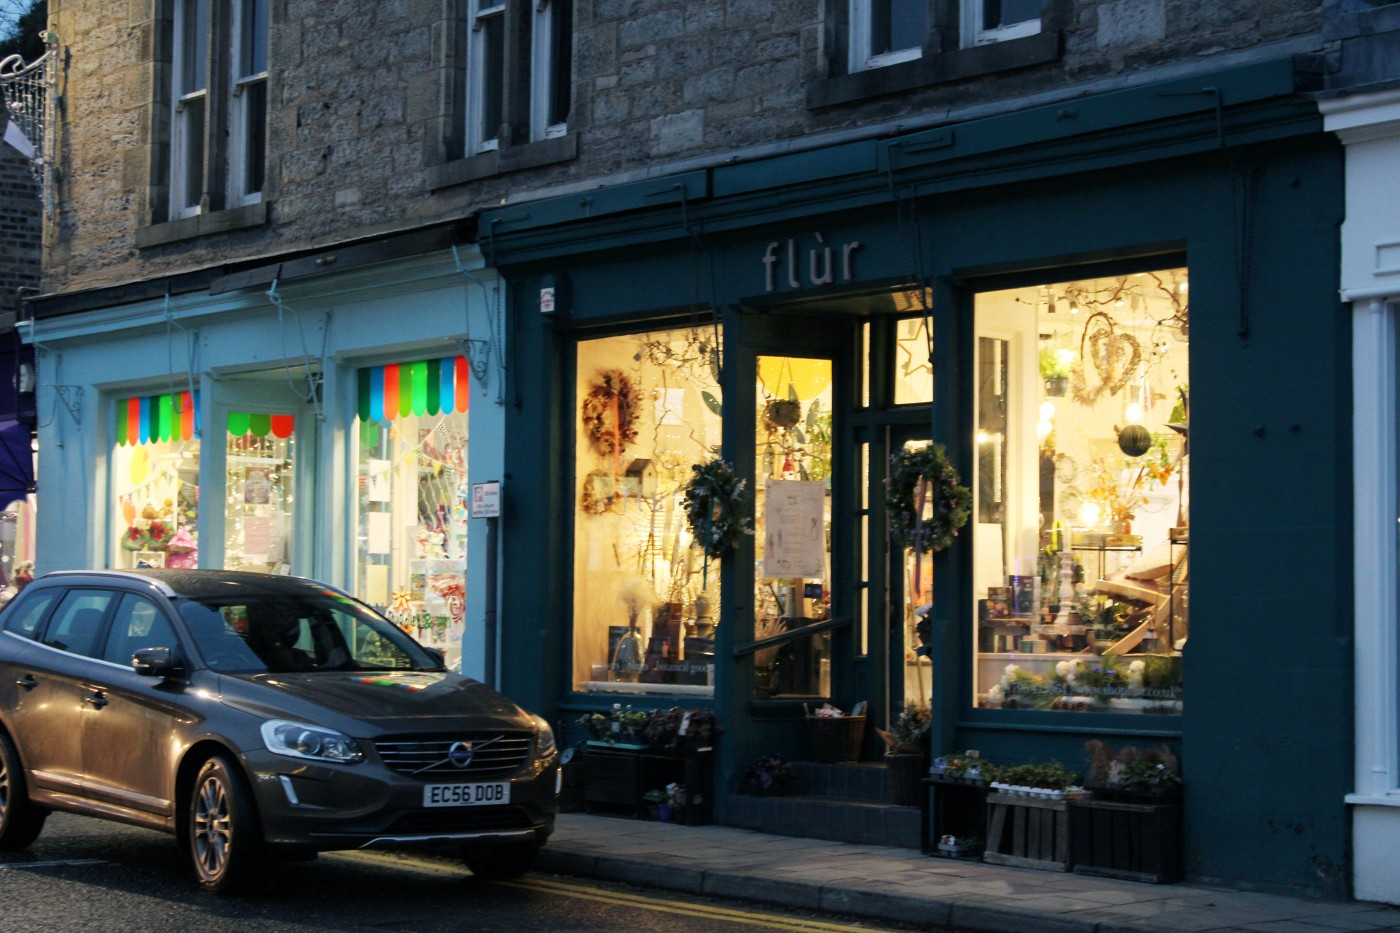 Where to buy Life Essentials nails, pain killers, laundry - emergency supplies in Pitlochry